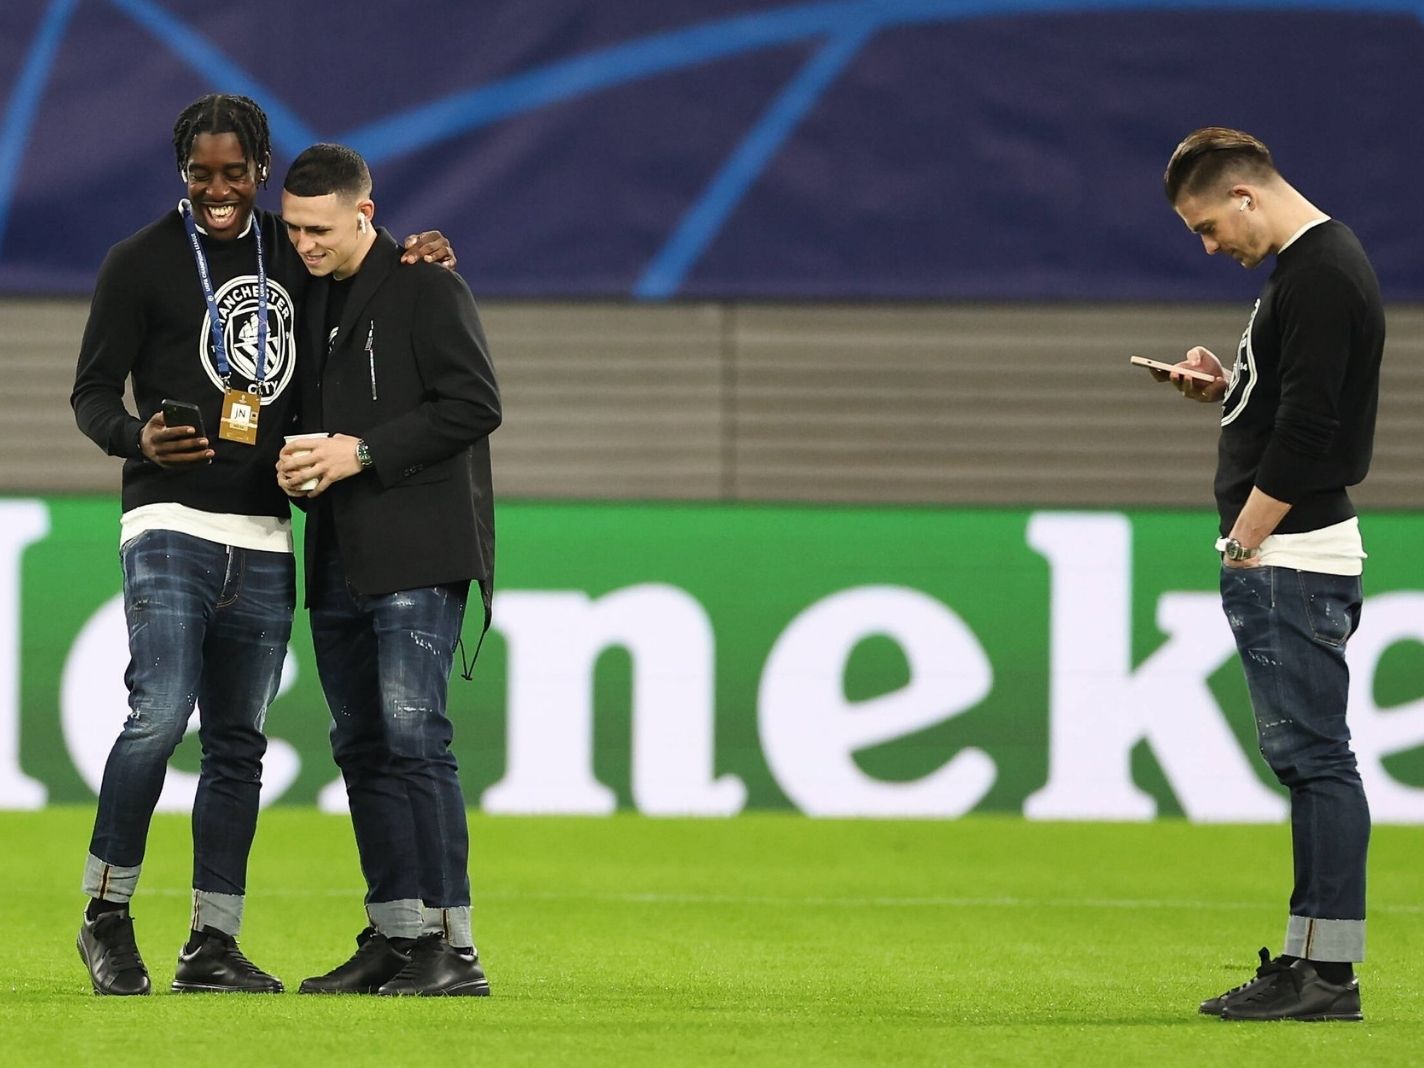 Man City players committed a major fashion faux pas before RB Leipzig game